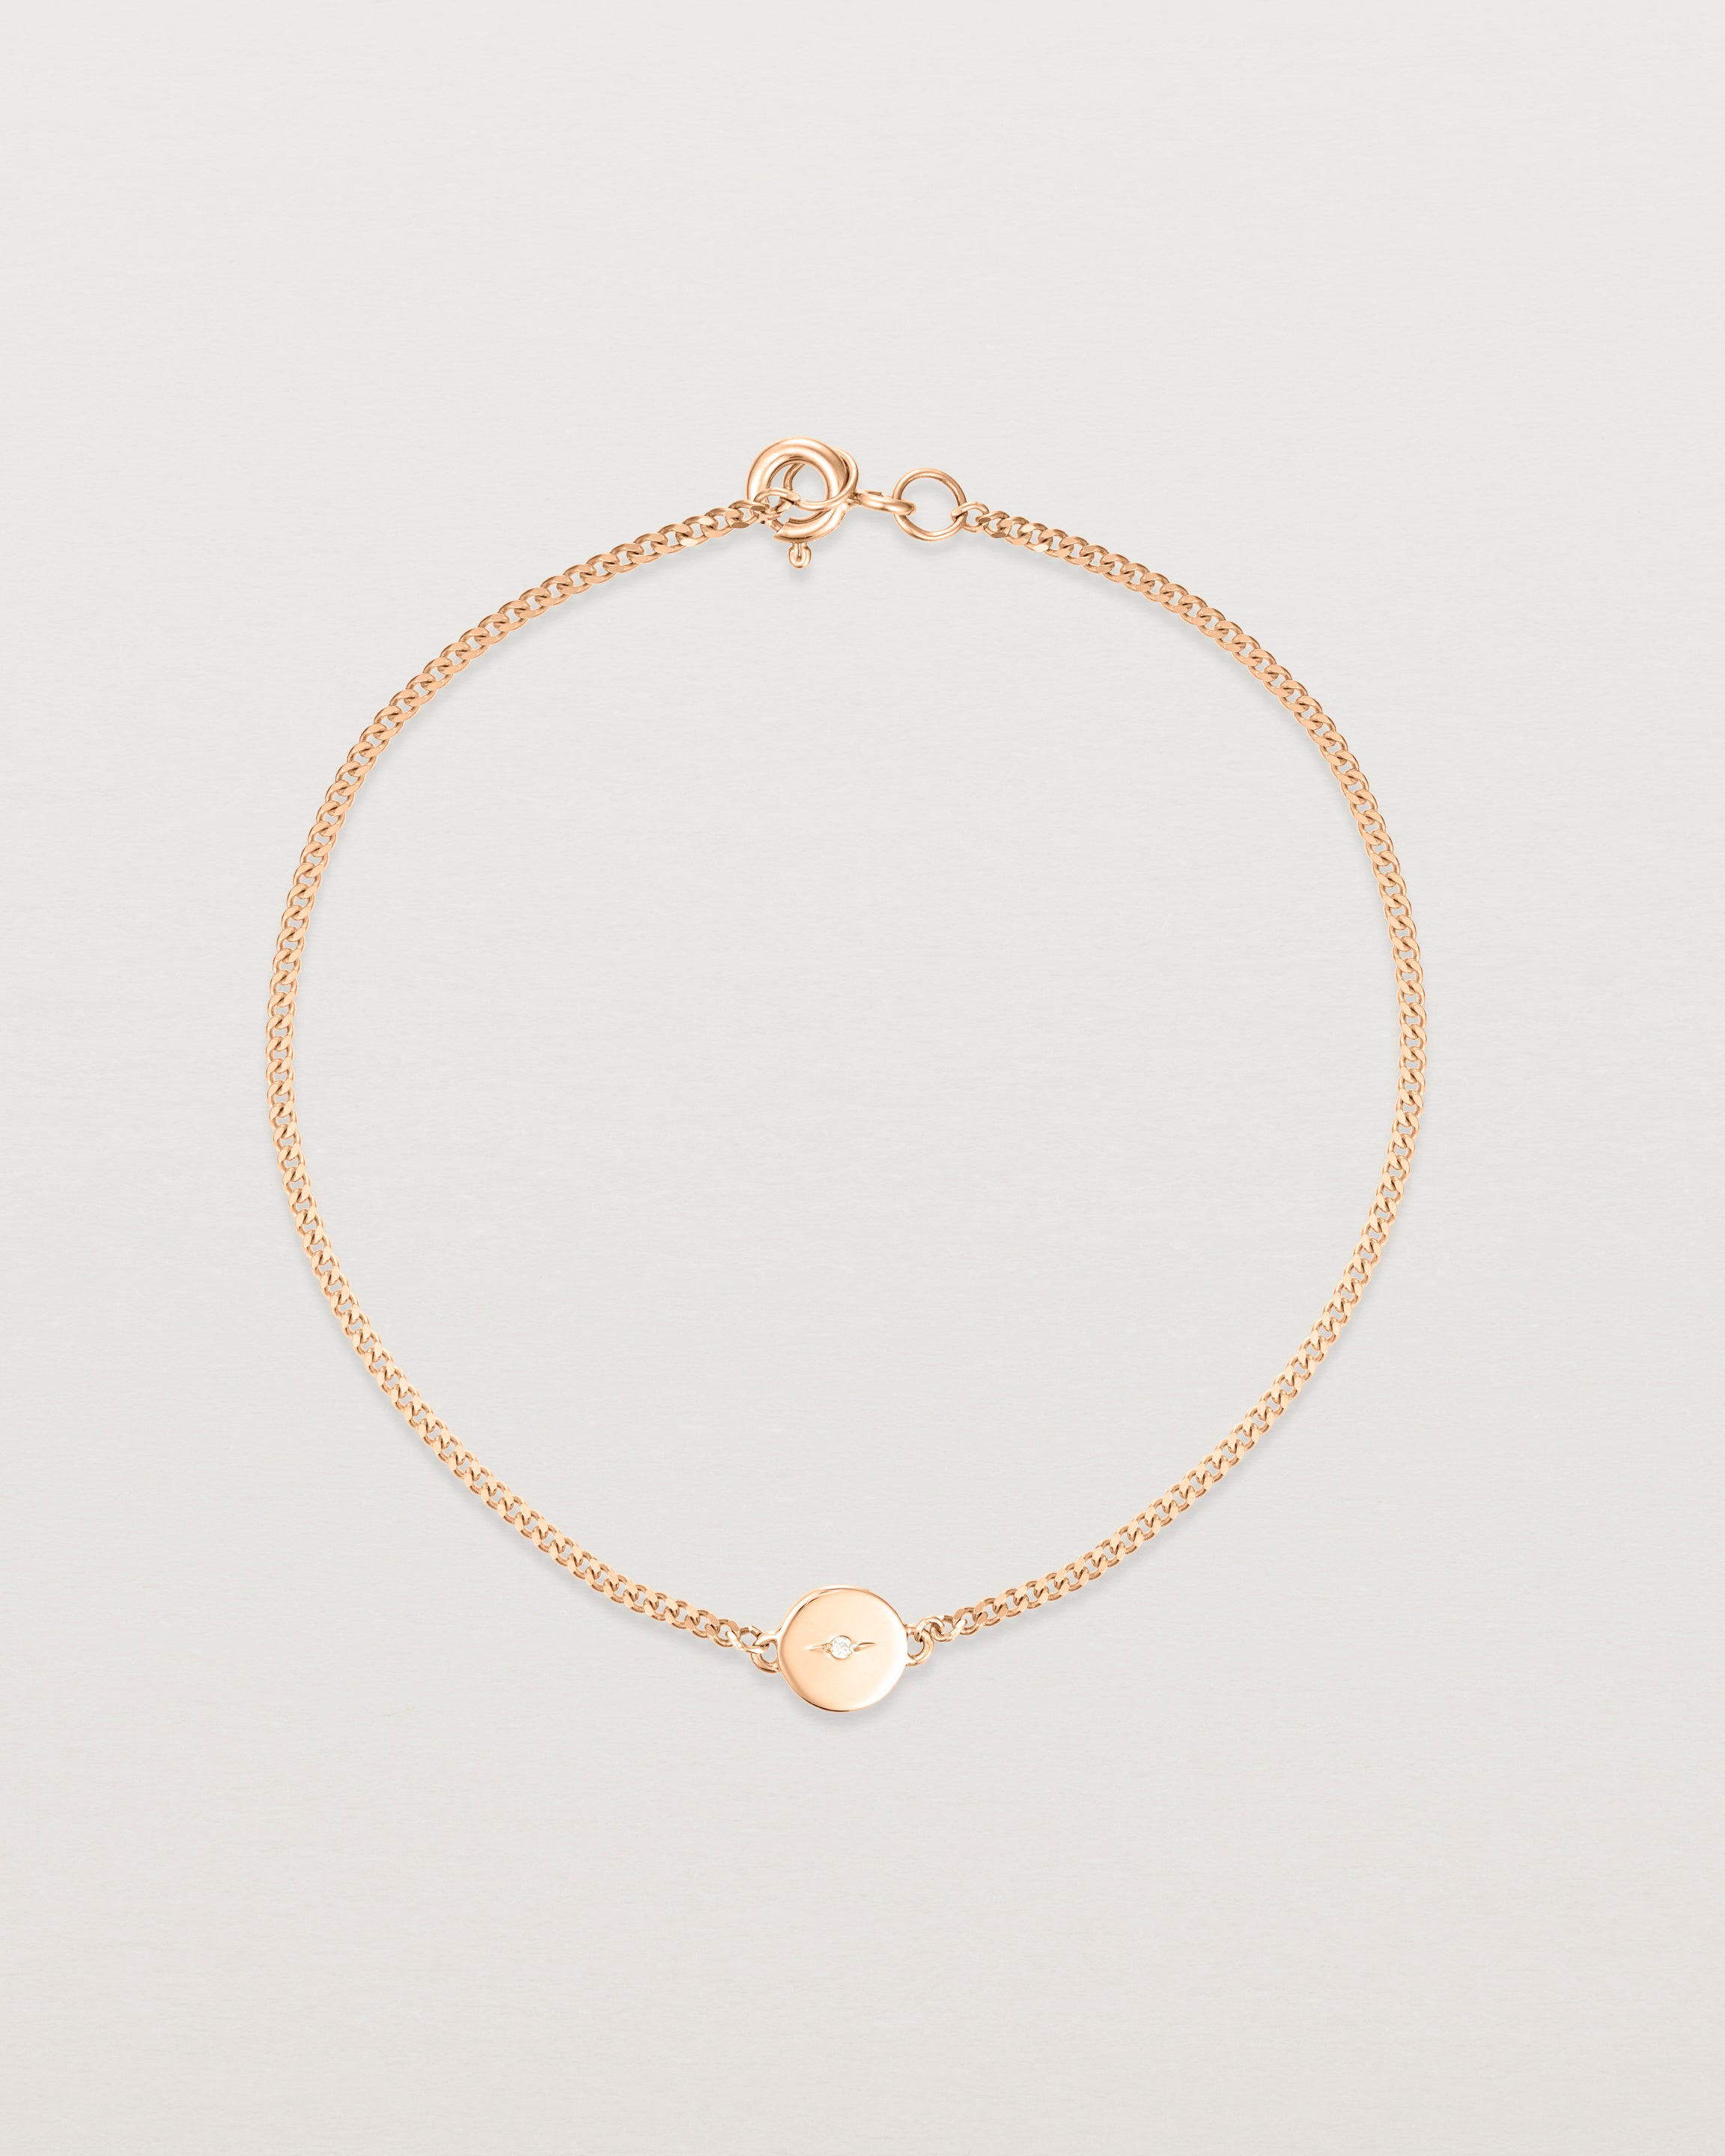 Top view of the Eily Bracelet | Birthstone in rose gold.